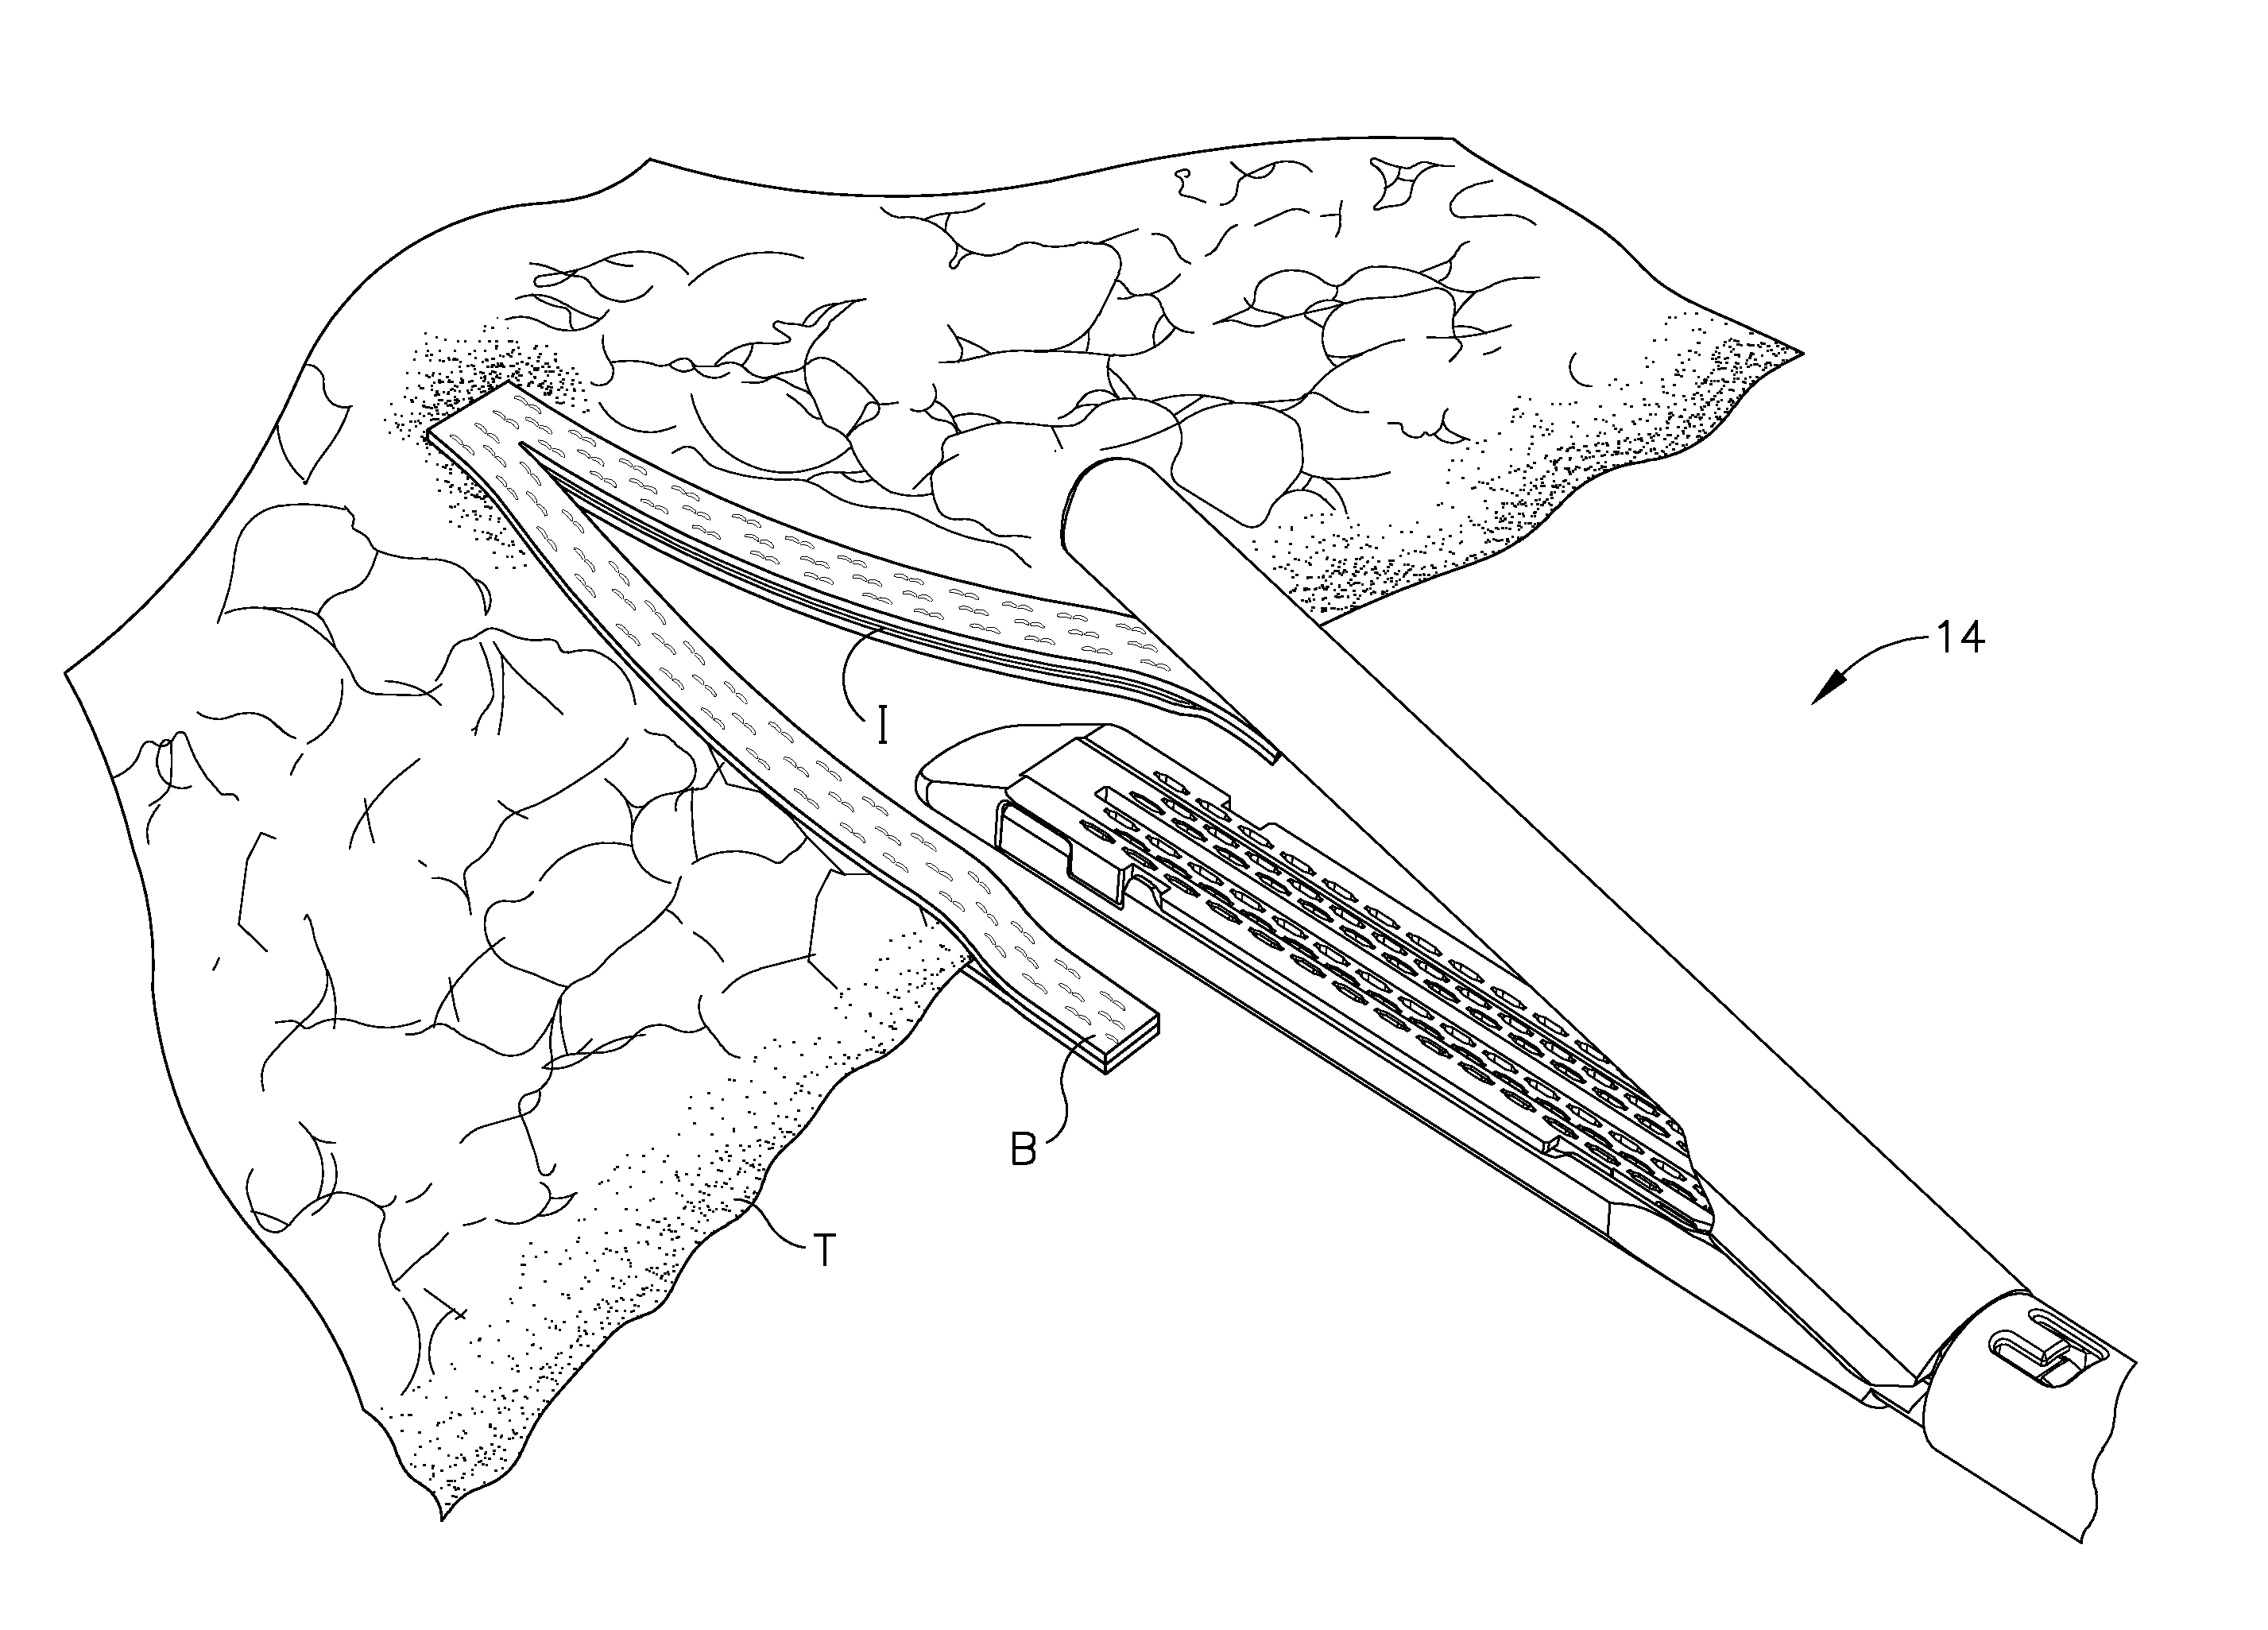 Buttress material for a surgical stapling instrument